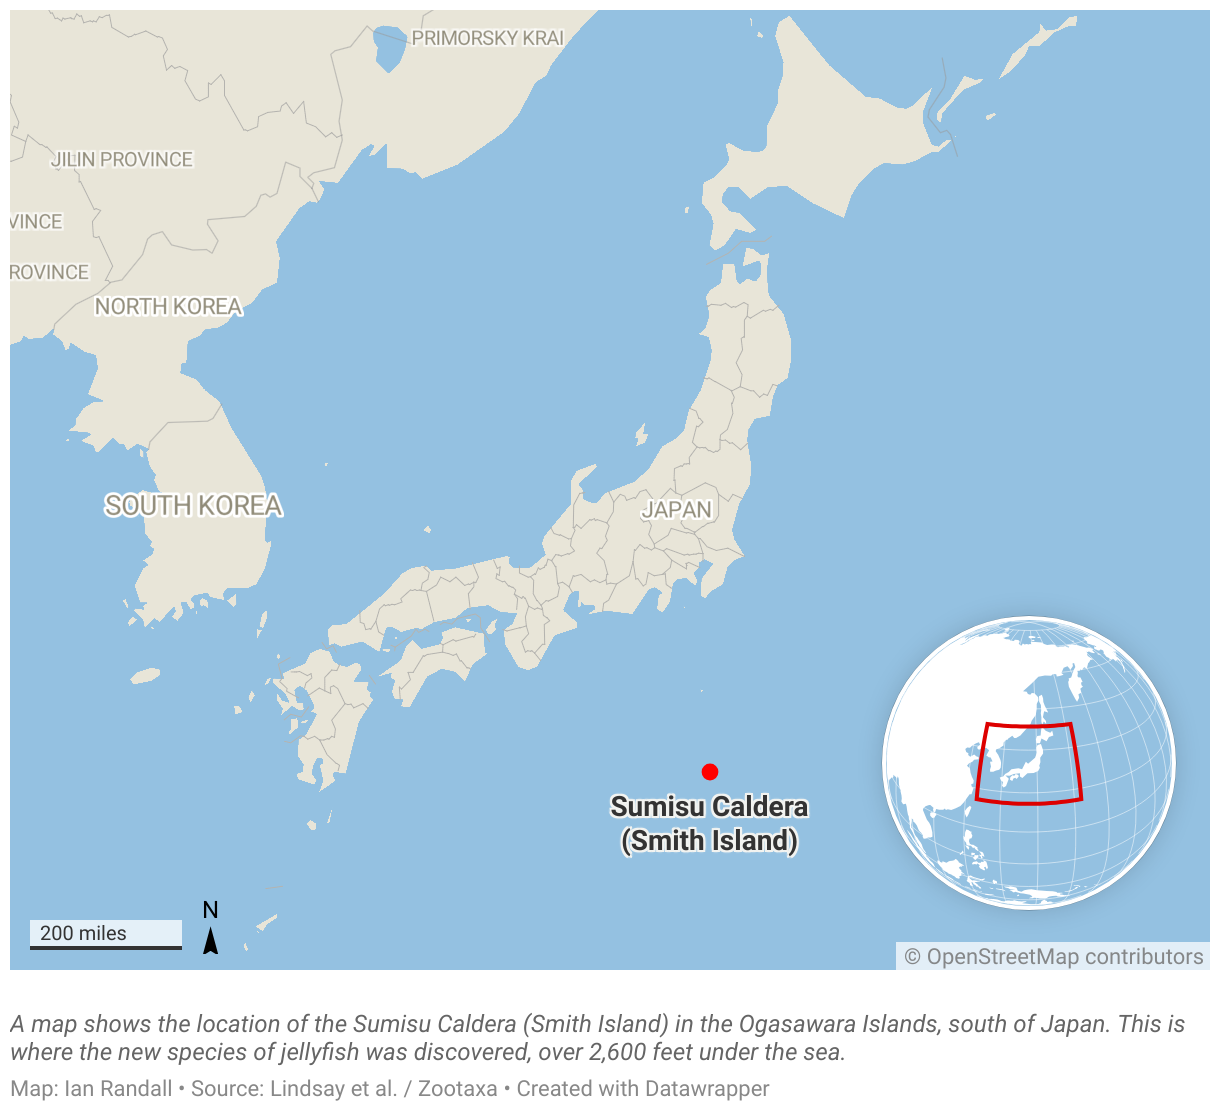 A map show the location of the Sumisu Caldera (Smith Island) in the Ogasawara Islands, south of Japan.